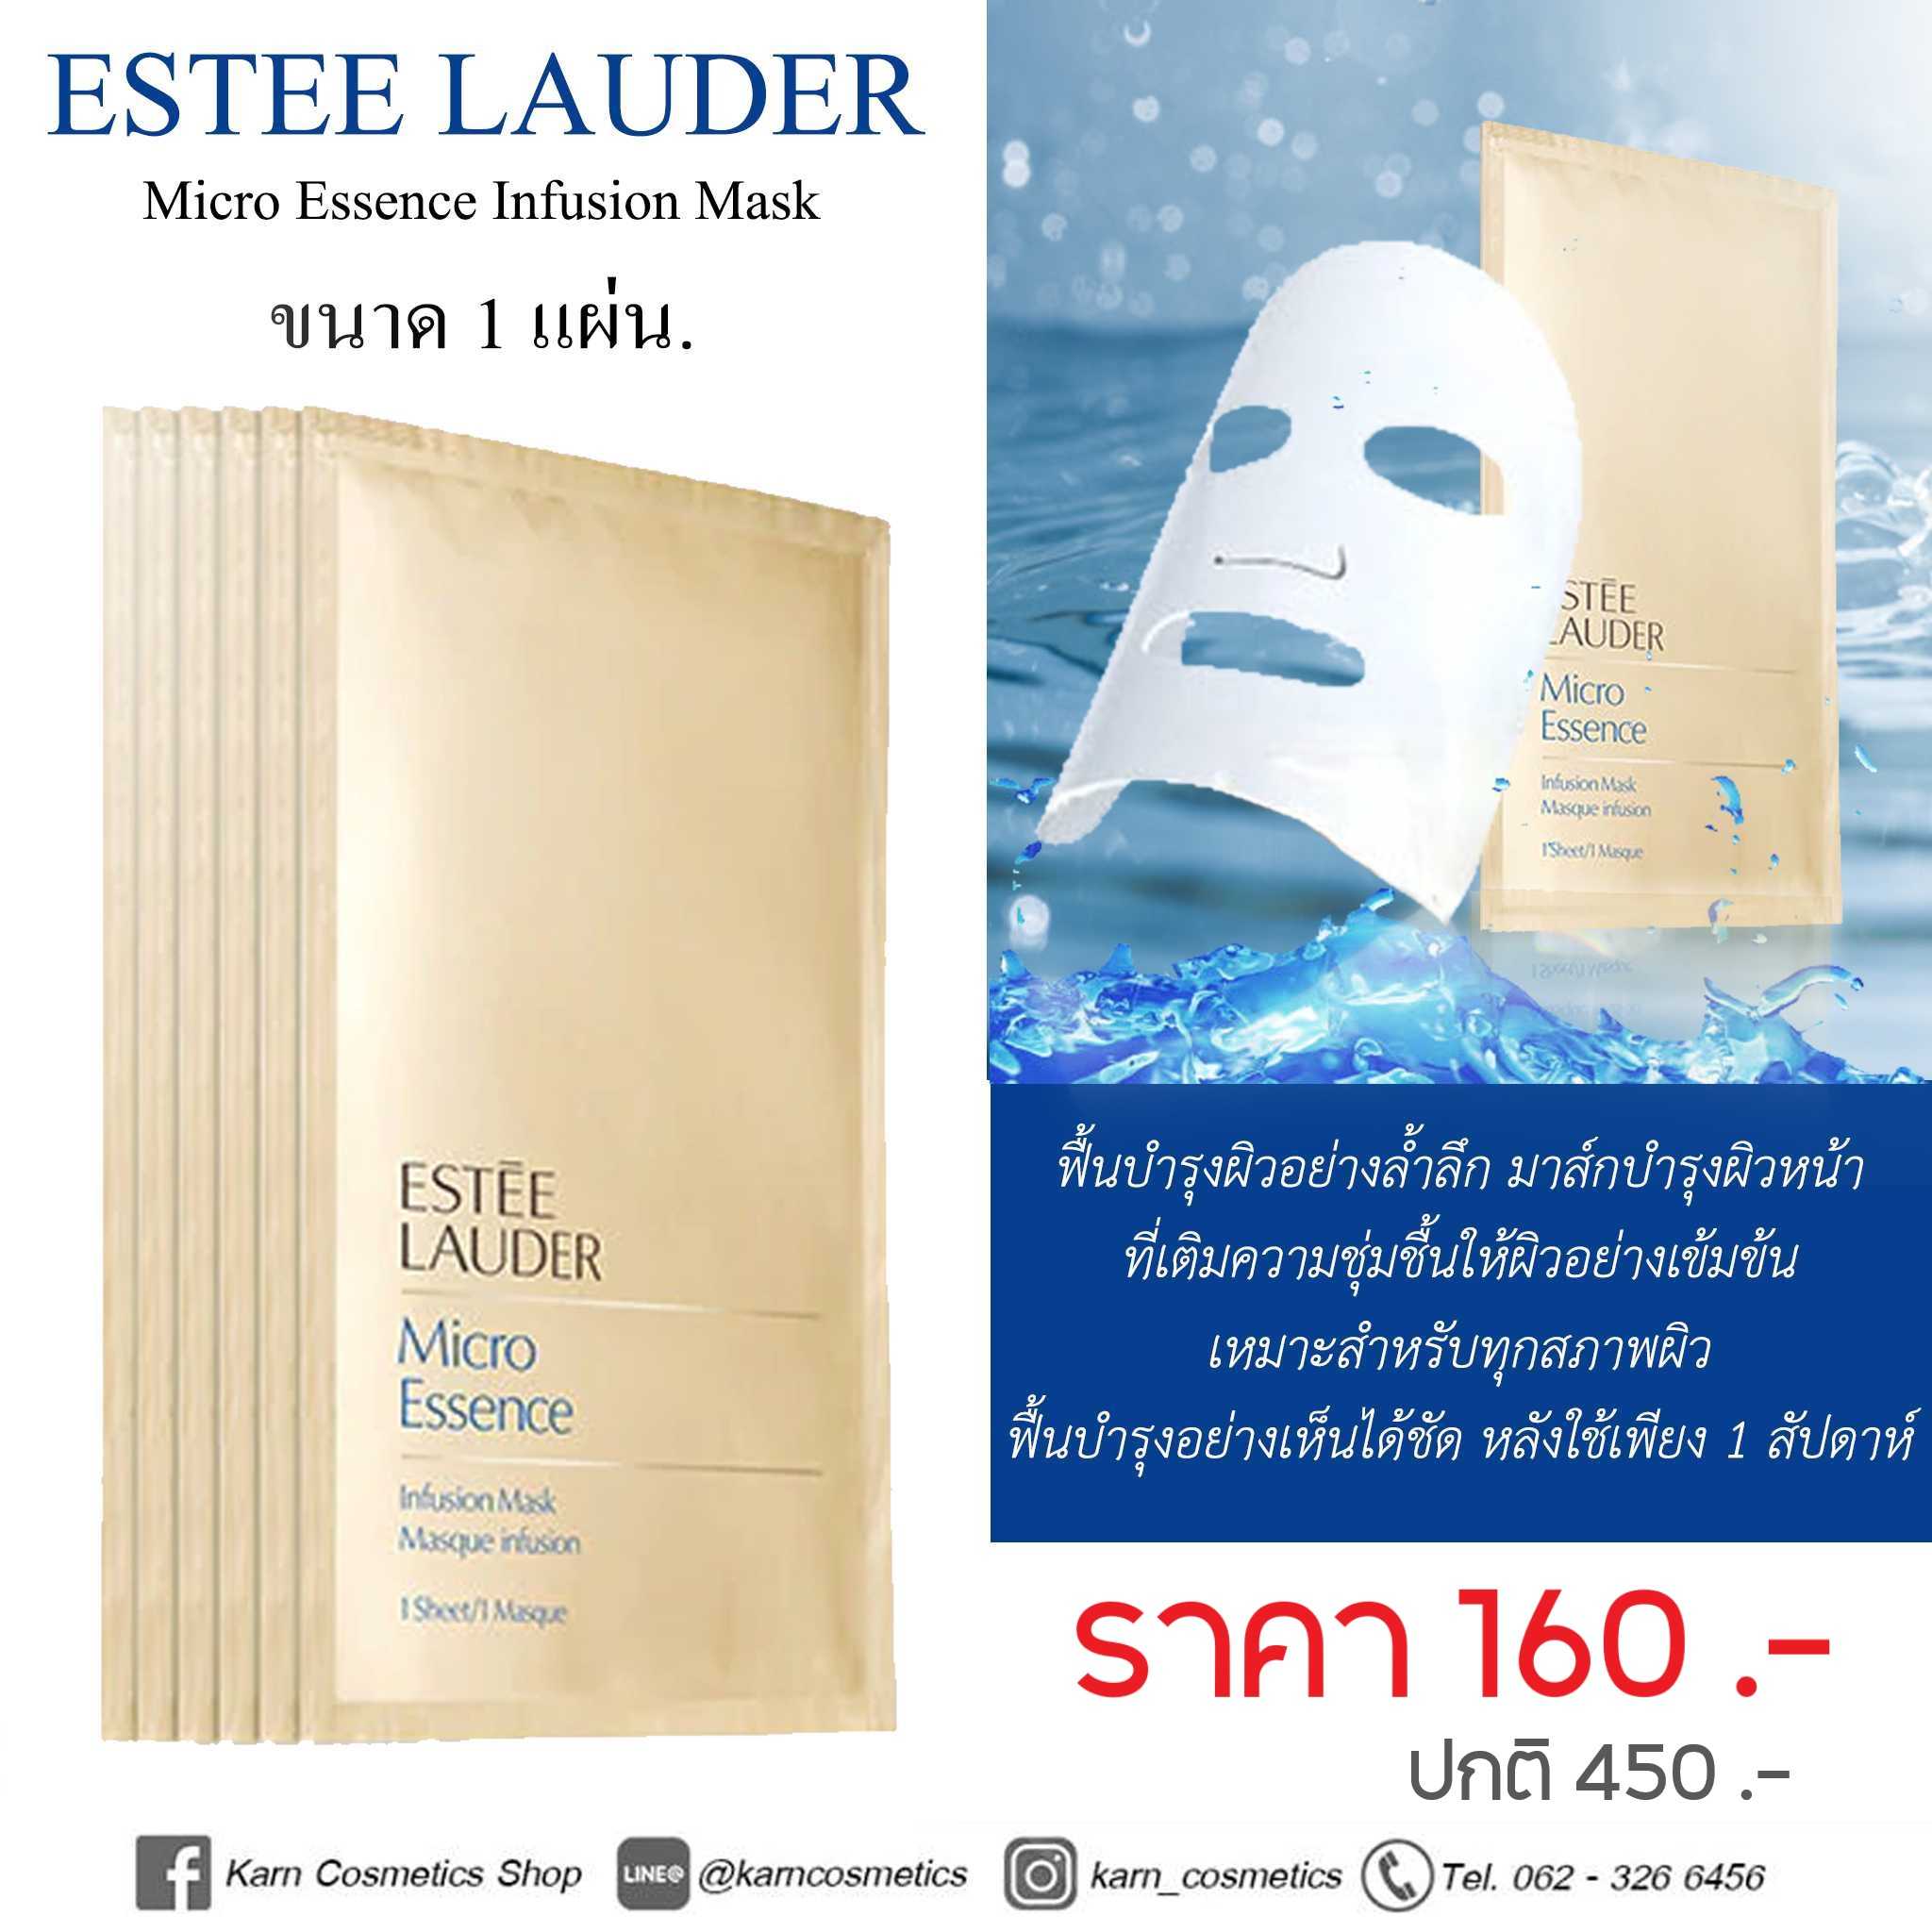 Estee Lauder Micro Infusion Mask 1 LINE SHOPPING